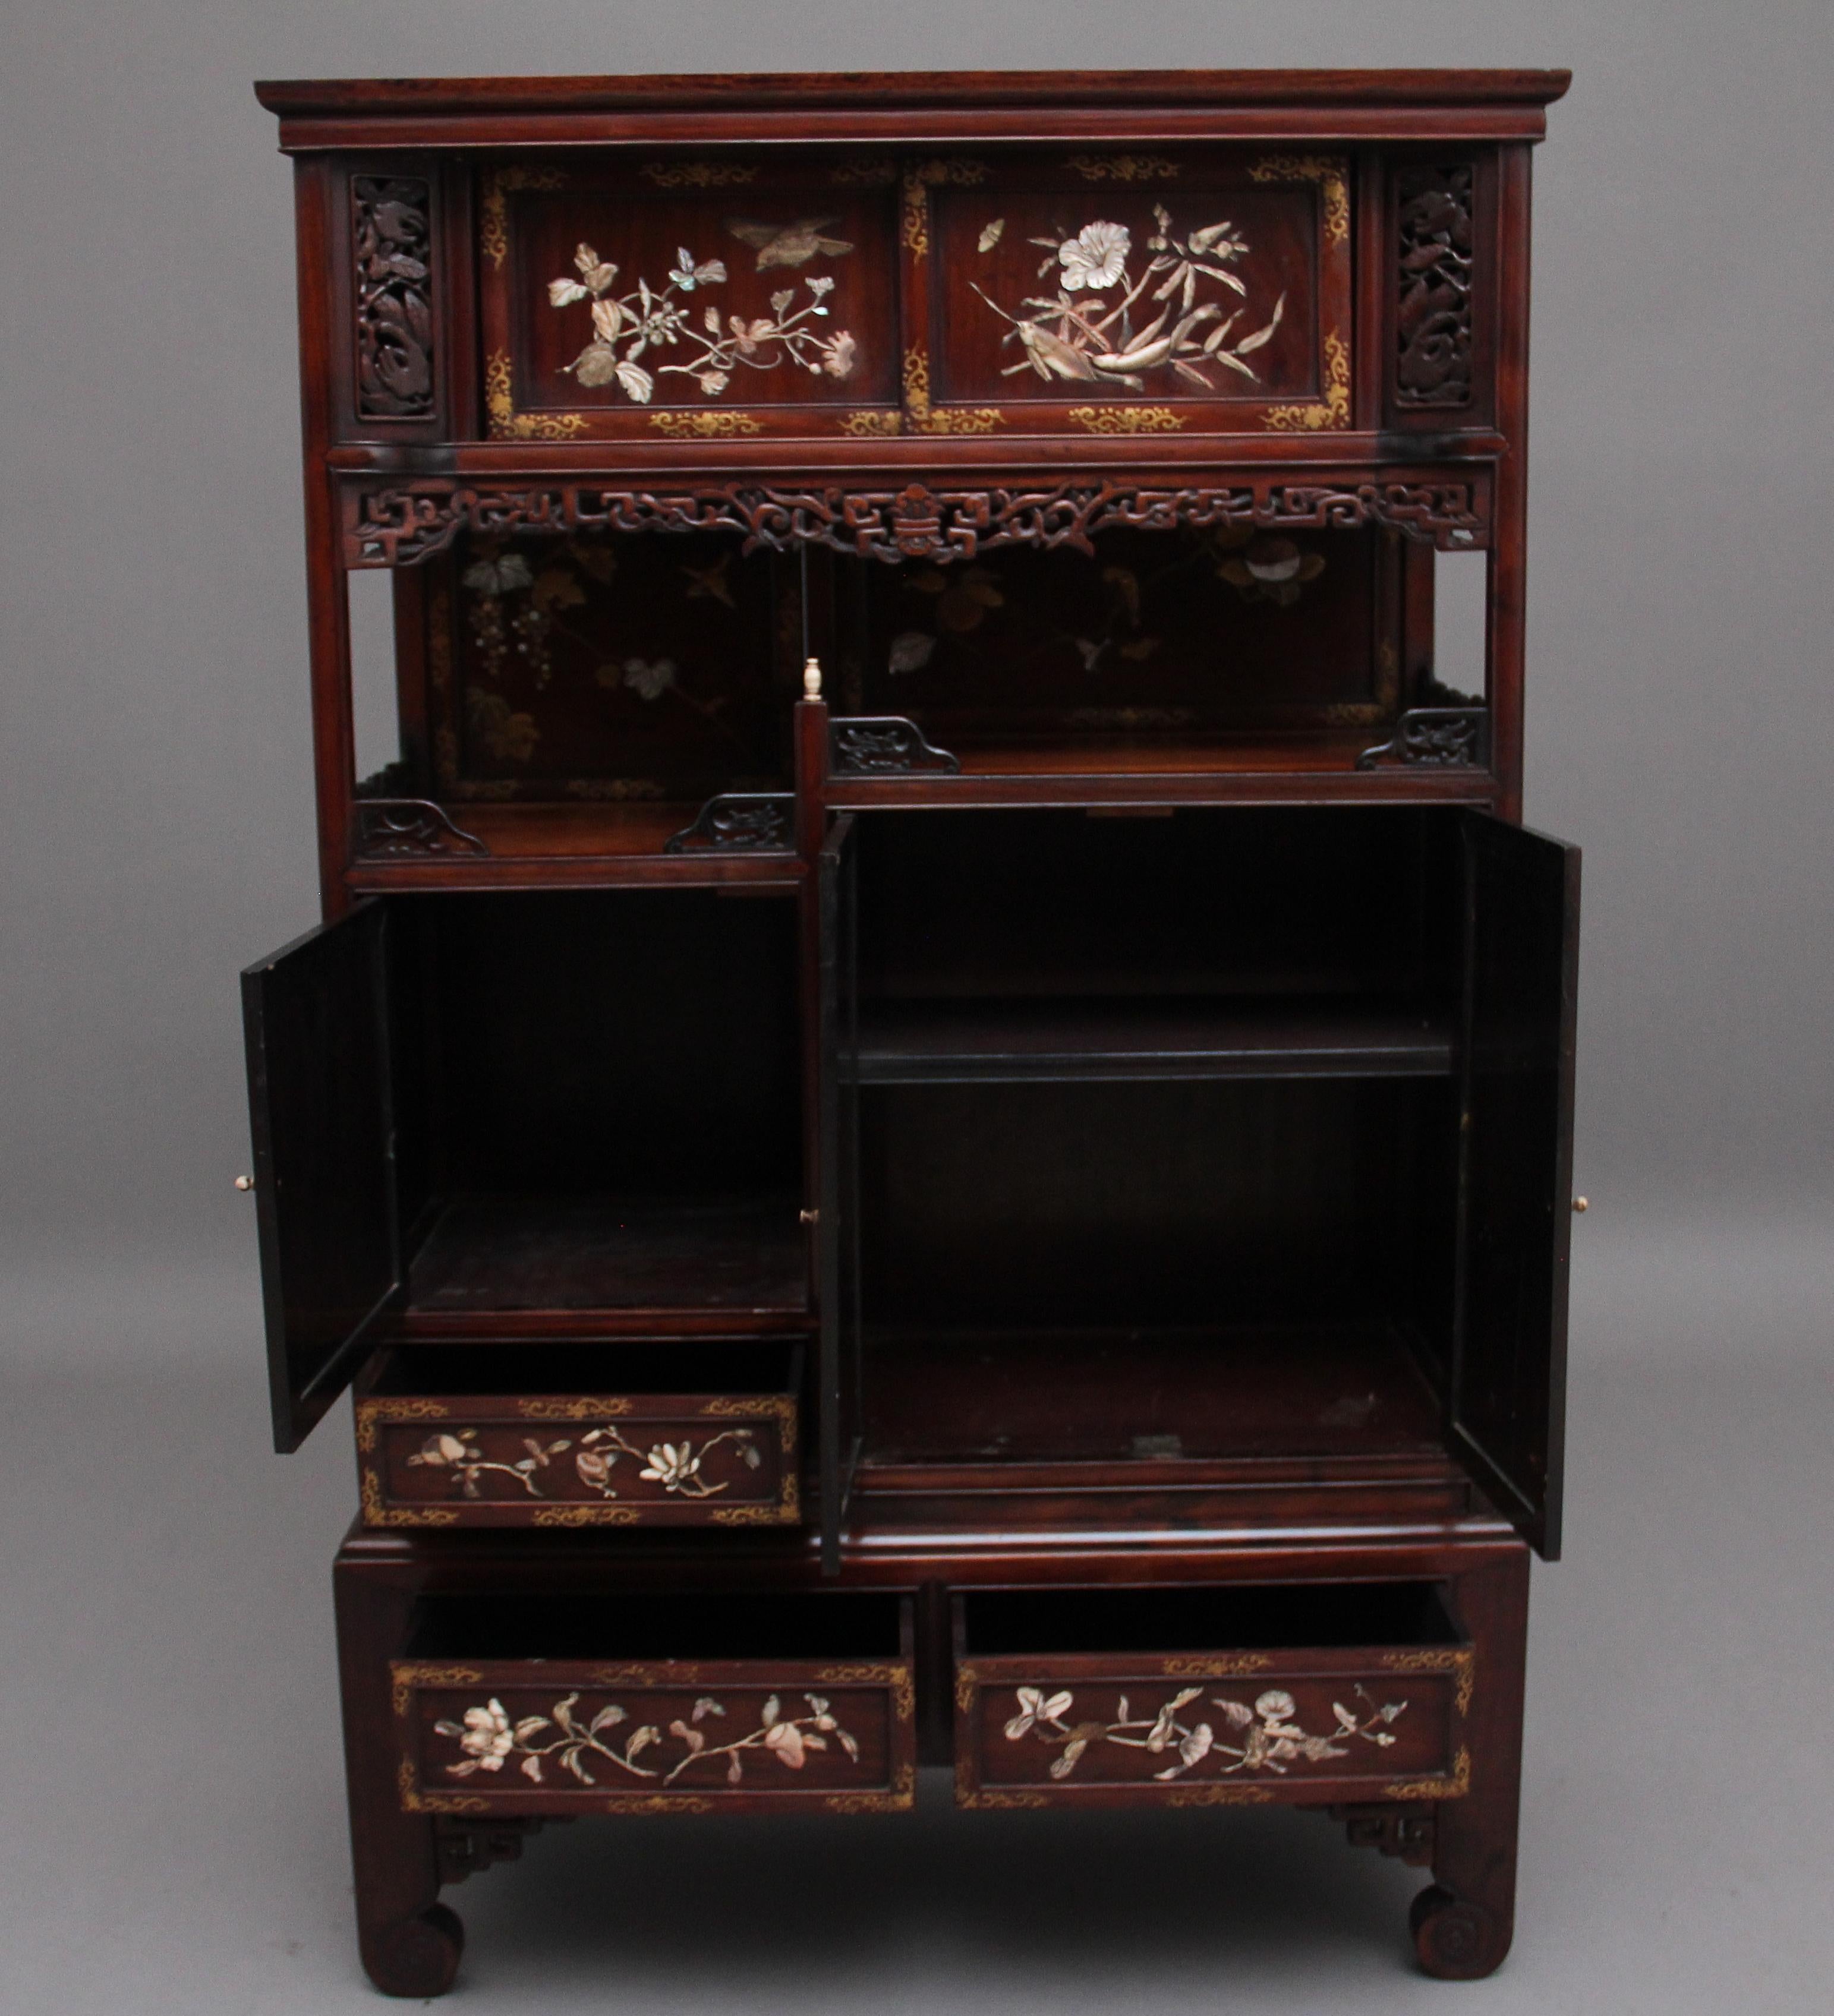 A superb quality 19th Century Japanese Meiji period shibayama shodhana, the rectangular top above a pair of sliding doors, a stepped niche and an arrangement of further panel doors and short drawers, profusely inlaid and applied throughout with